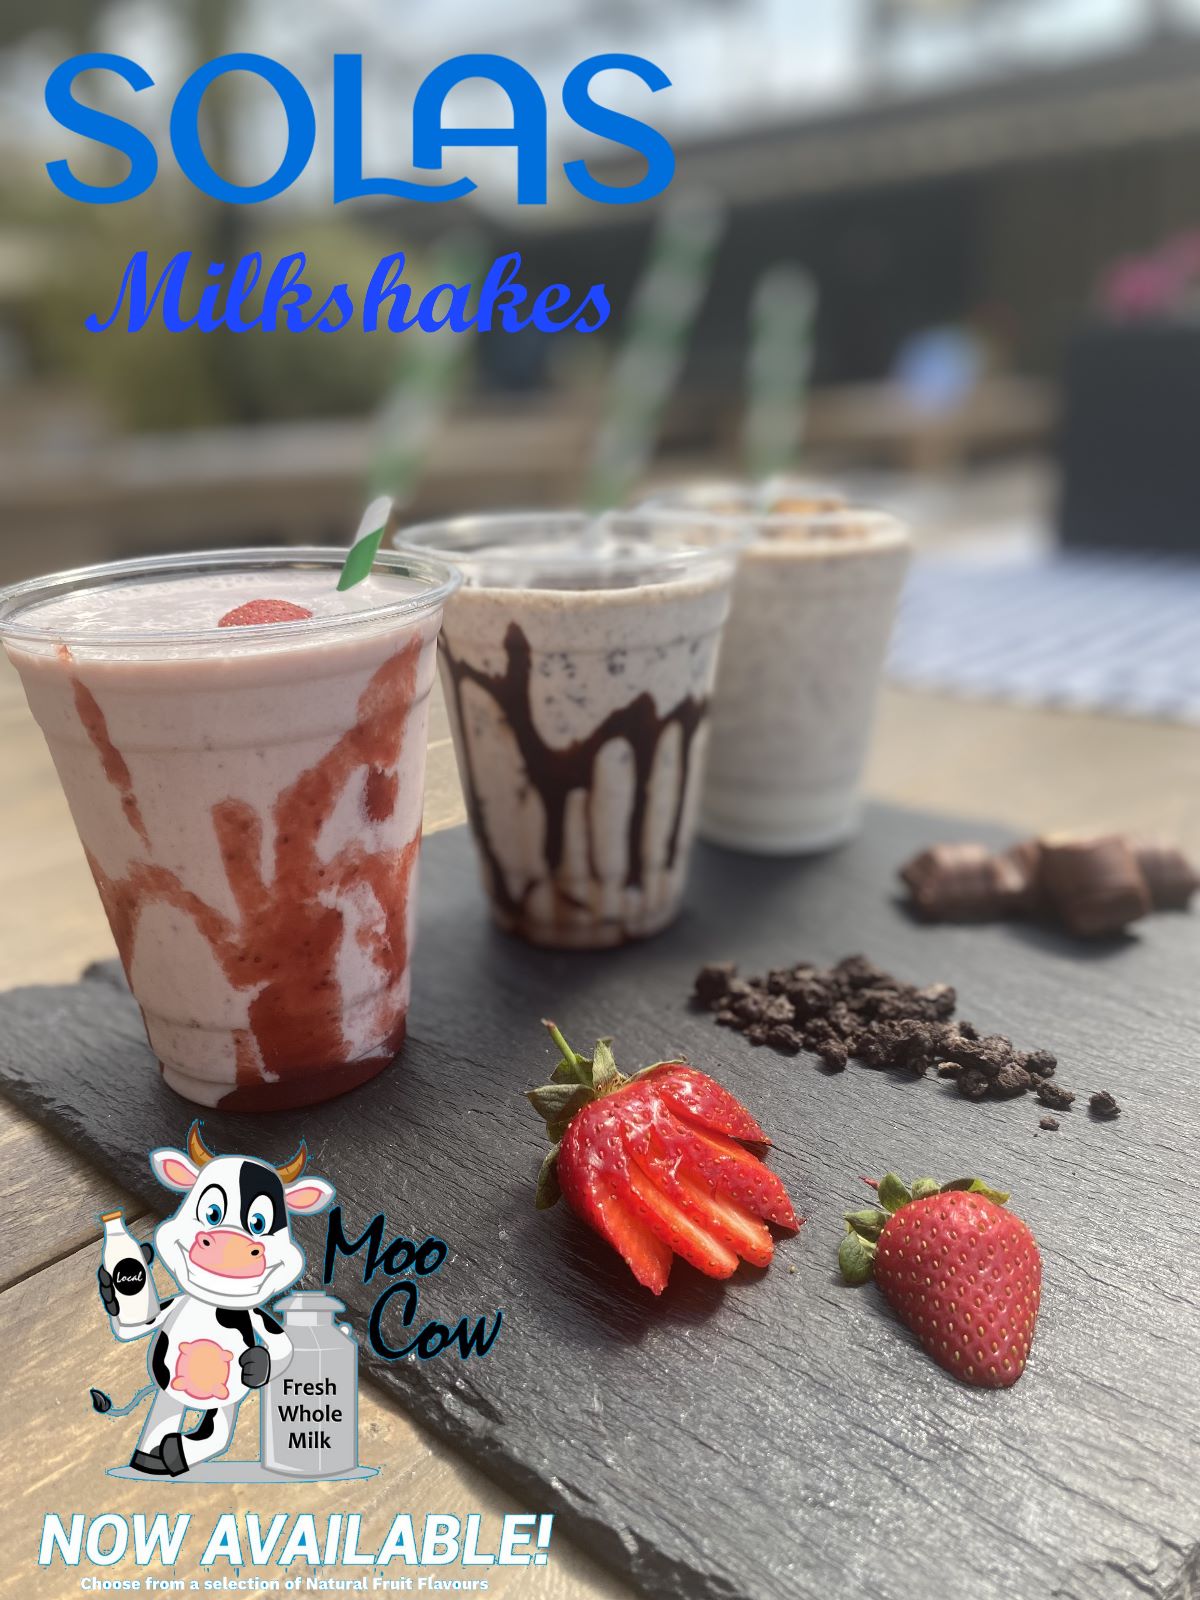 Milkshakes have been added to the menu at Solas Eco Garden Centre